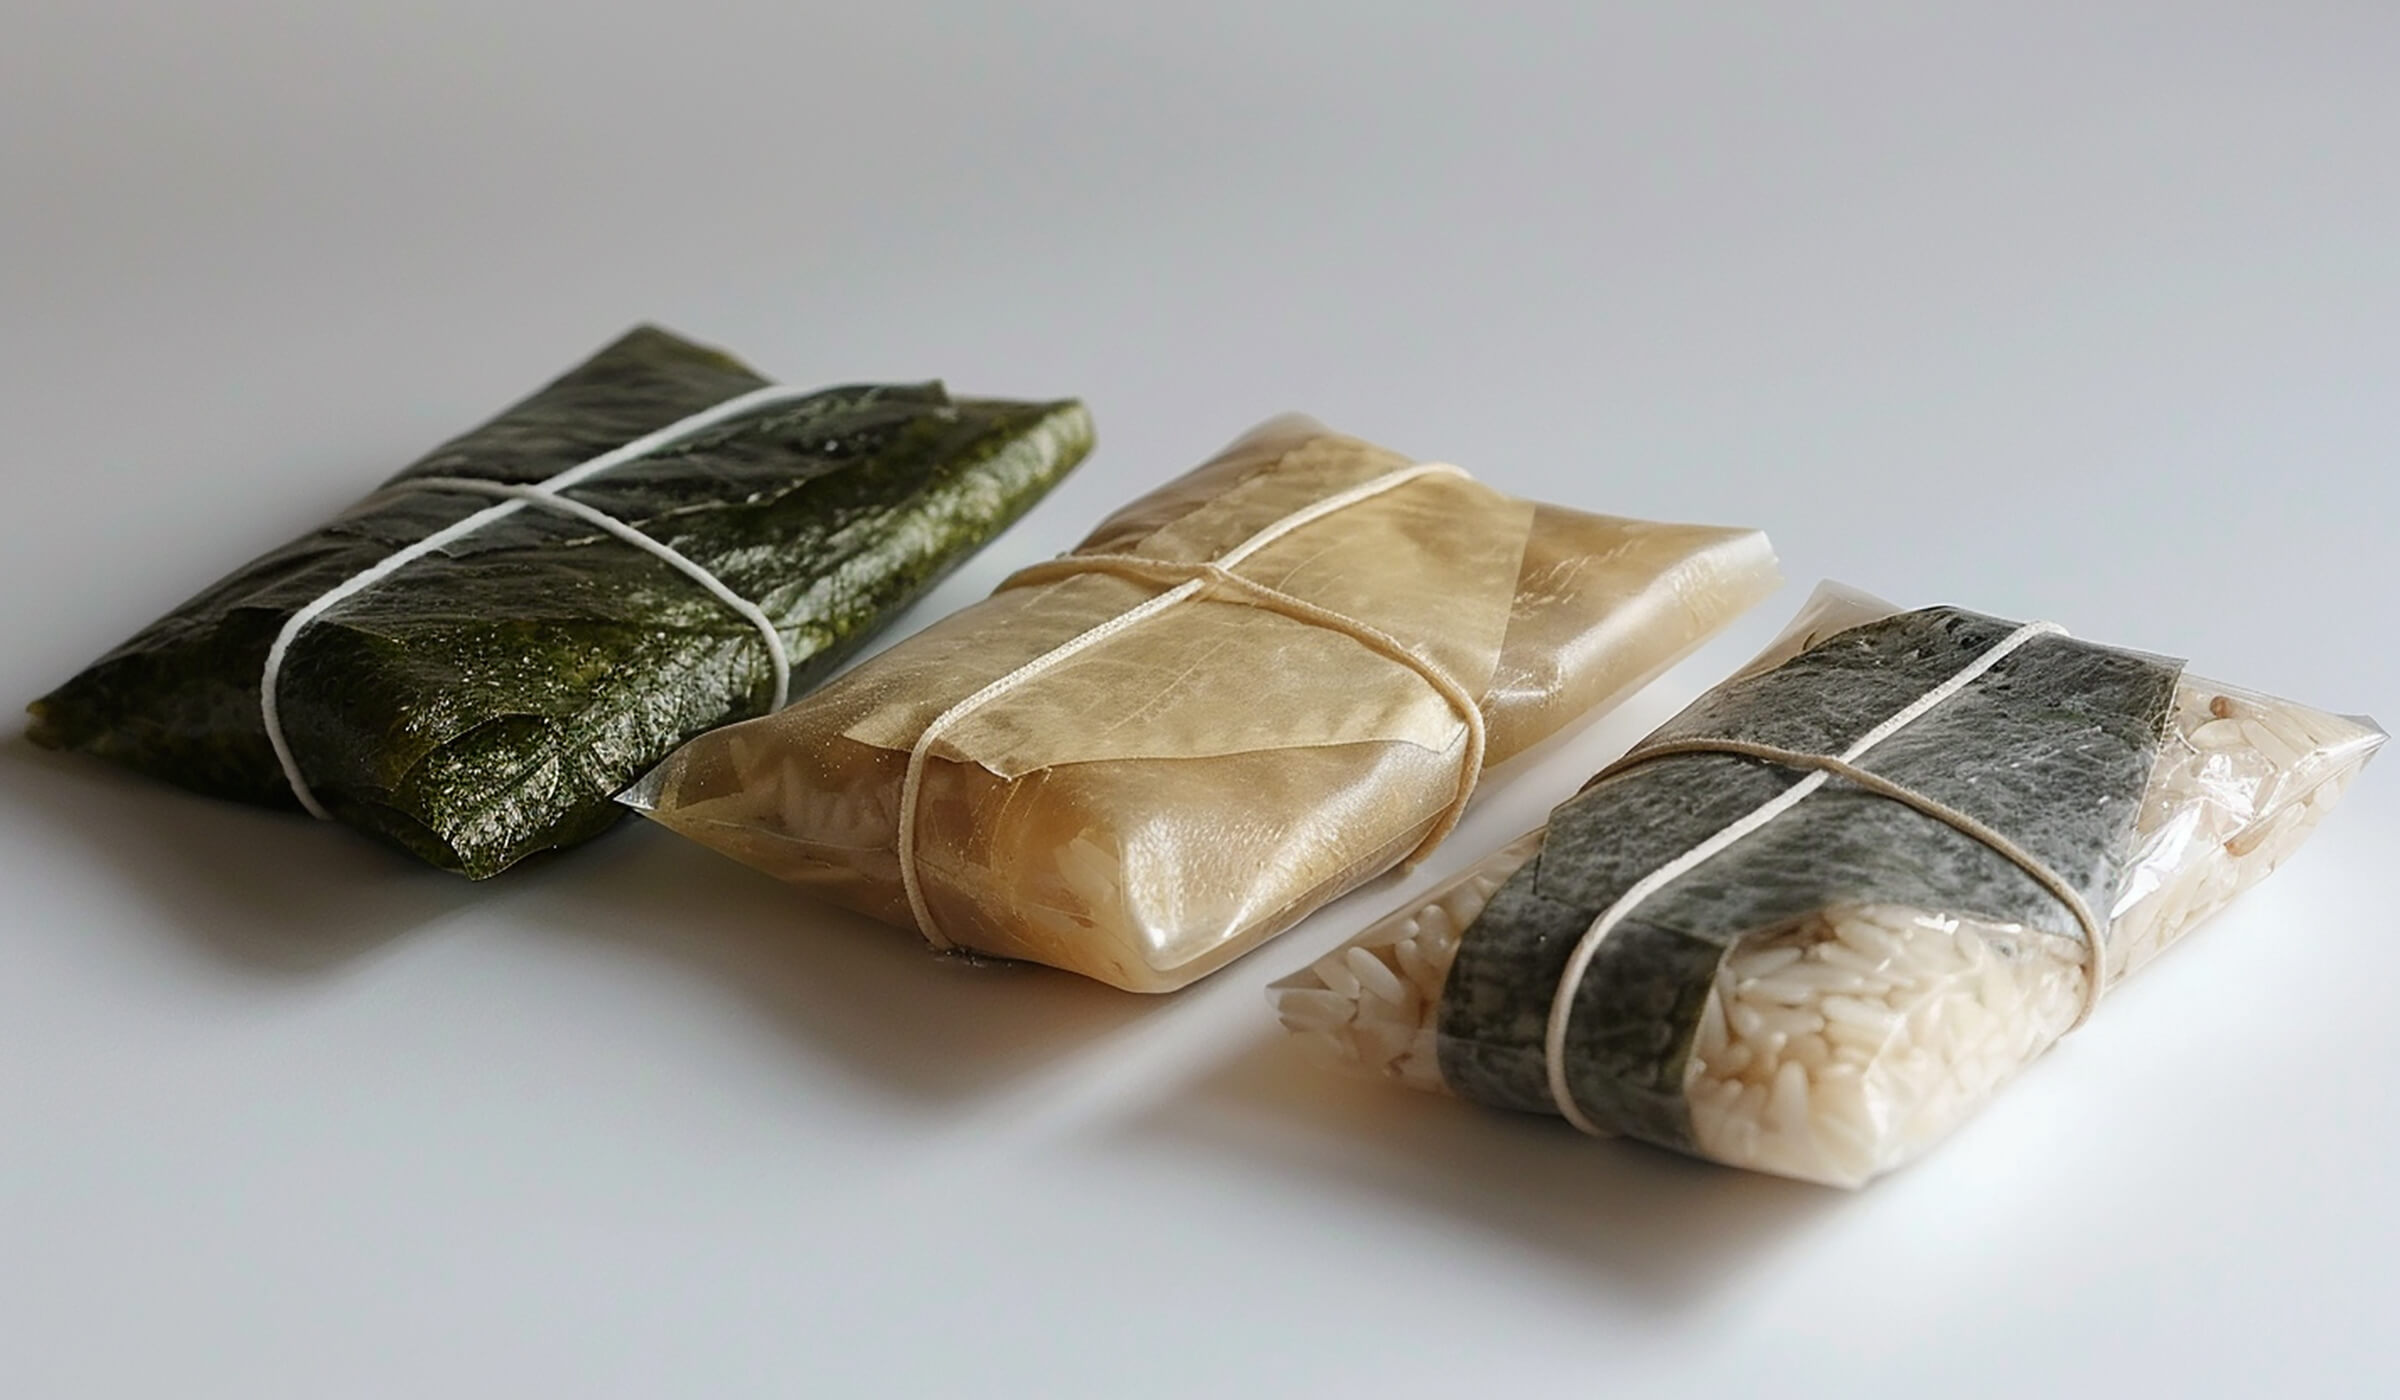 Three food items wrapped in edible / compostable packaging